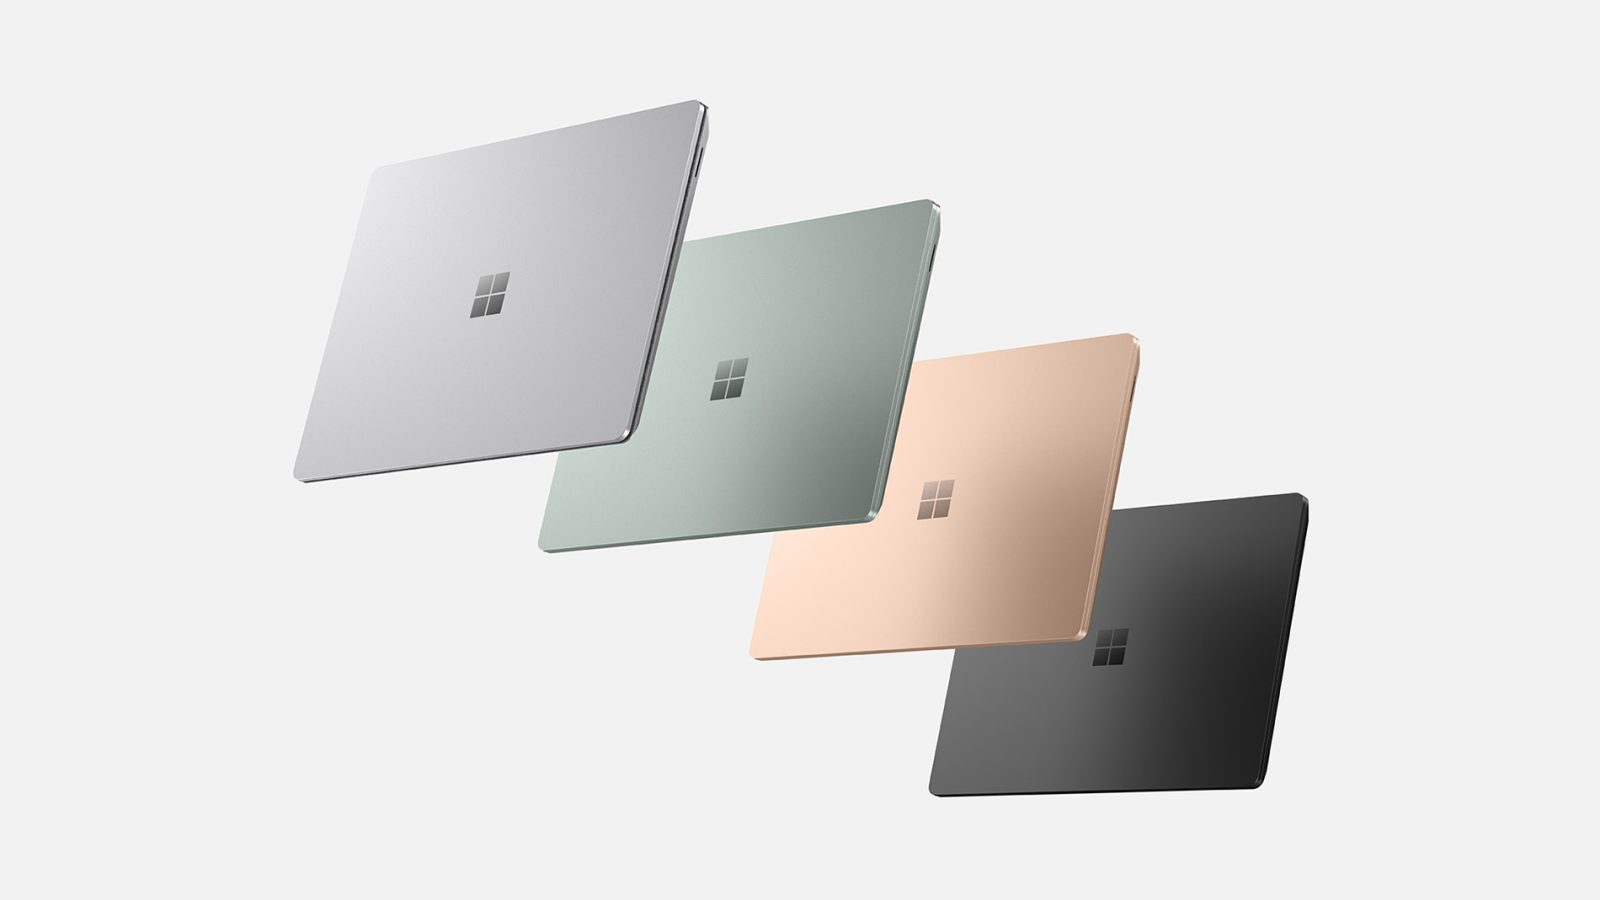 Four Surface Laptop 5 models in different colors on a white background.